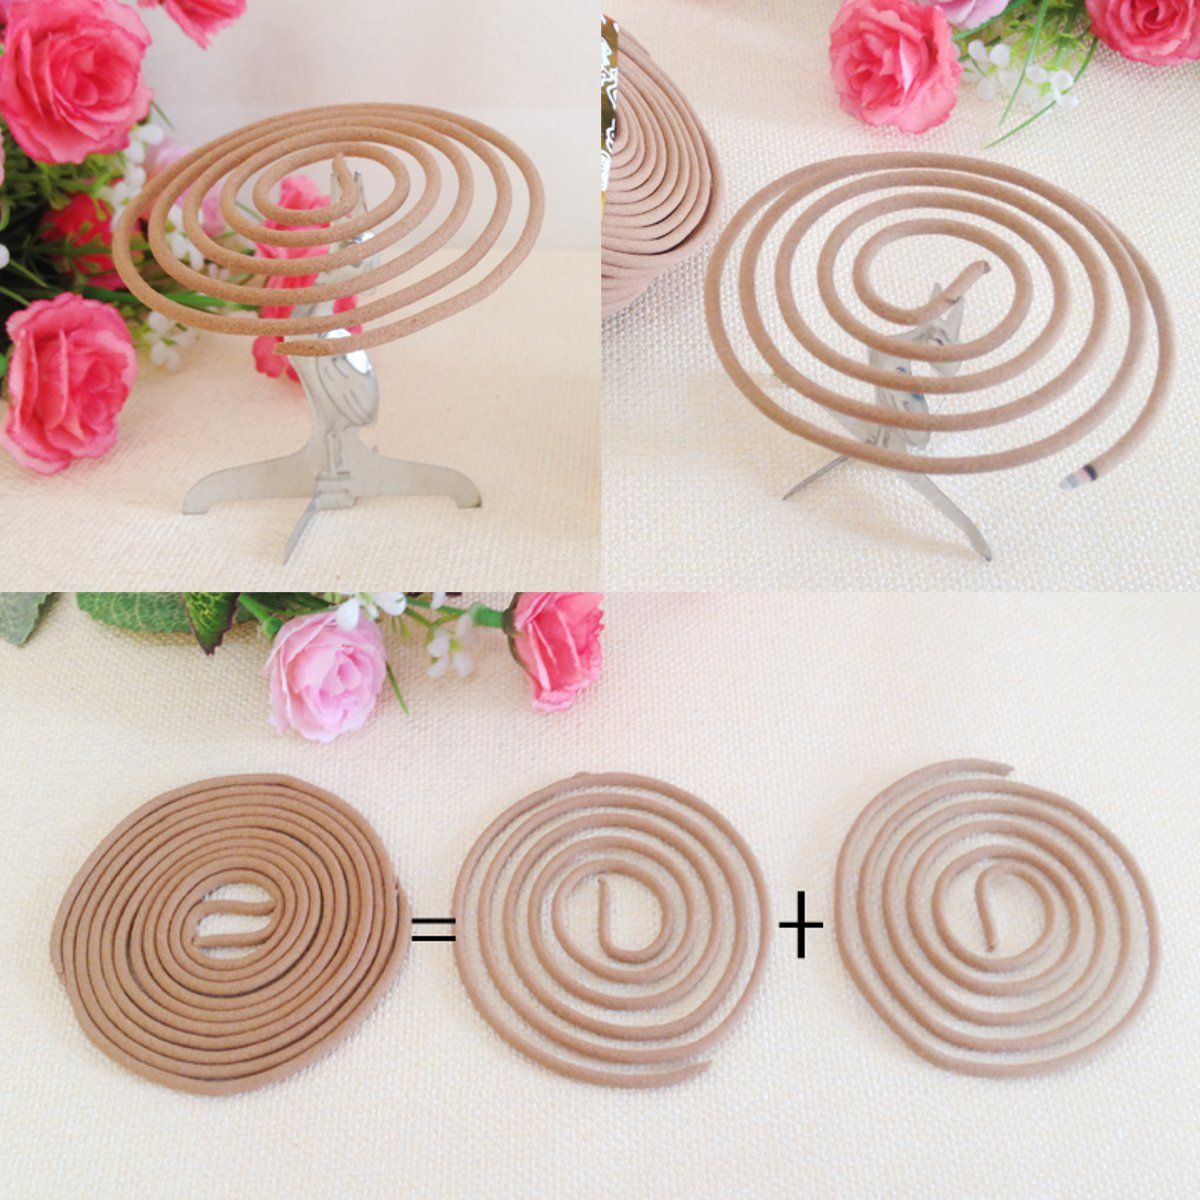 48pcs-Natural-Coil-Incense-Fragrance-Indoor-Aromatherapy-Buddhist-Holder-1719573